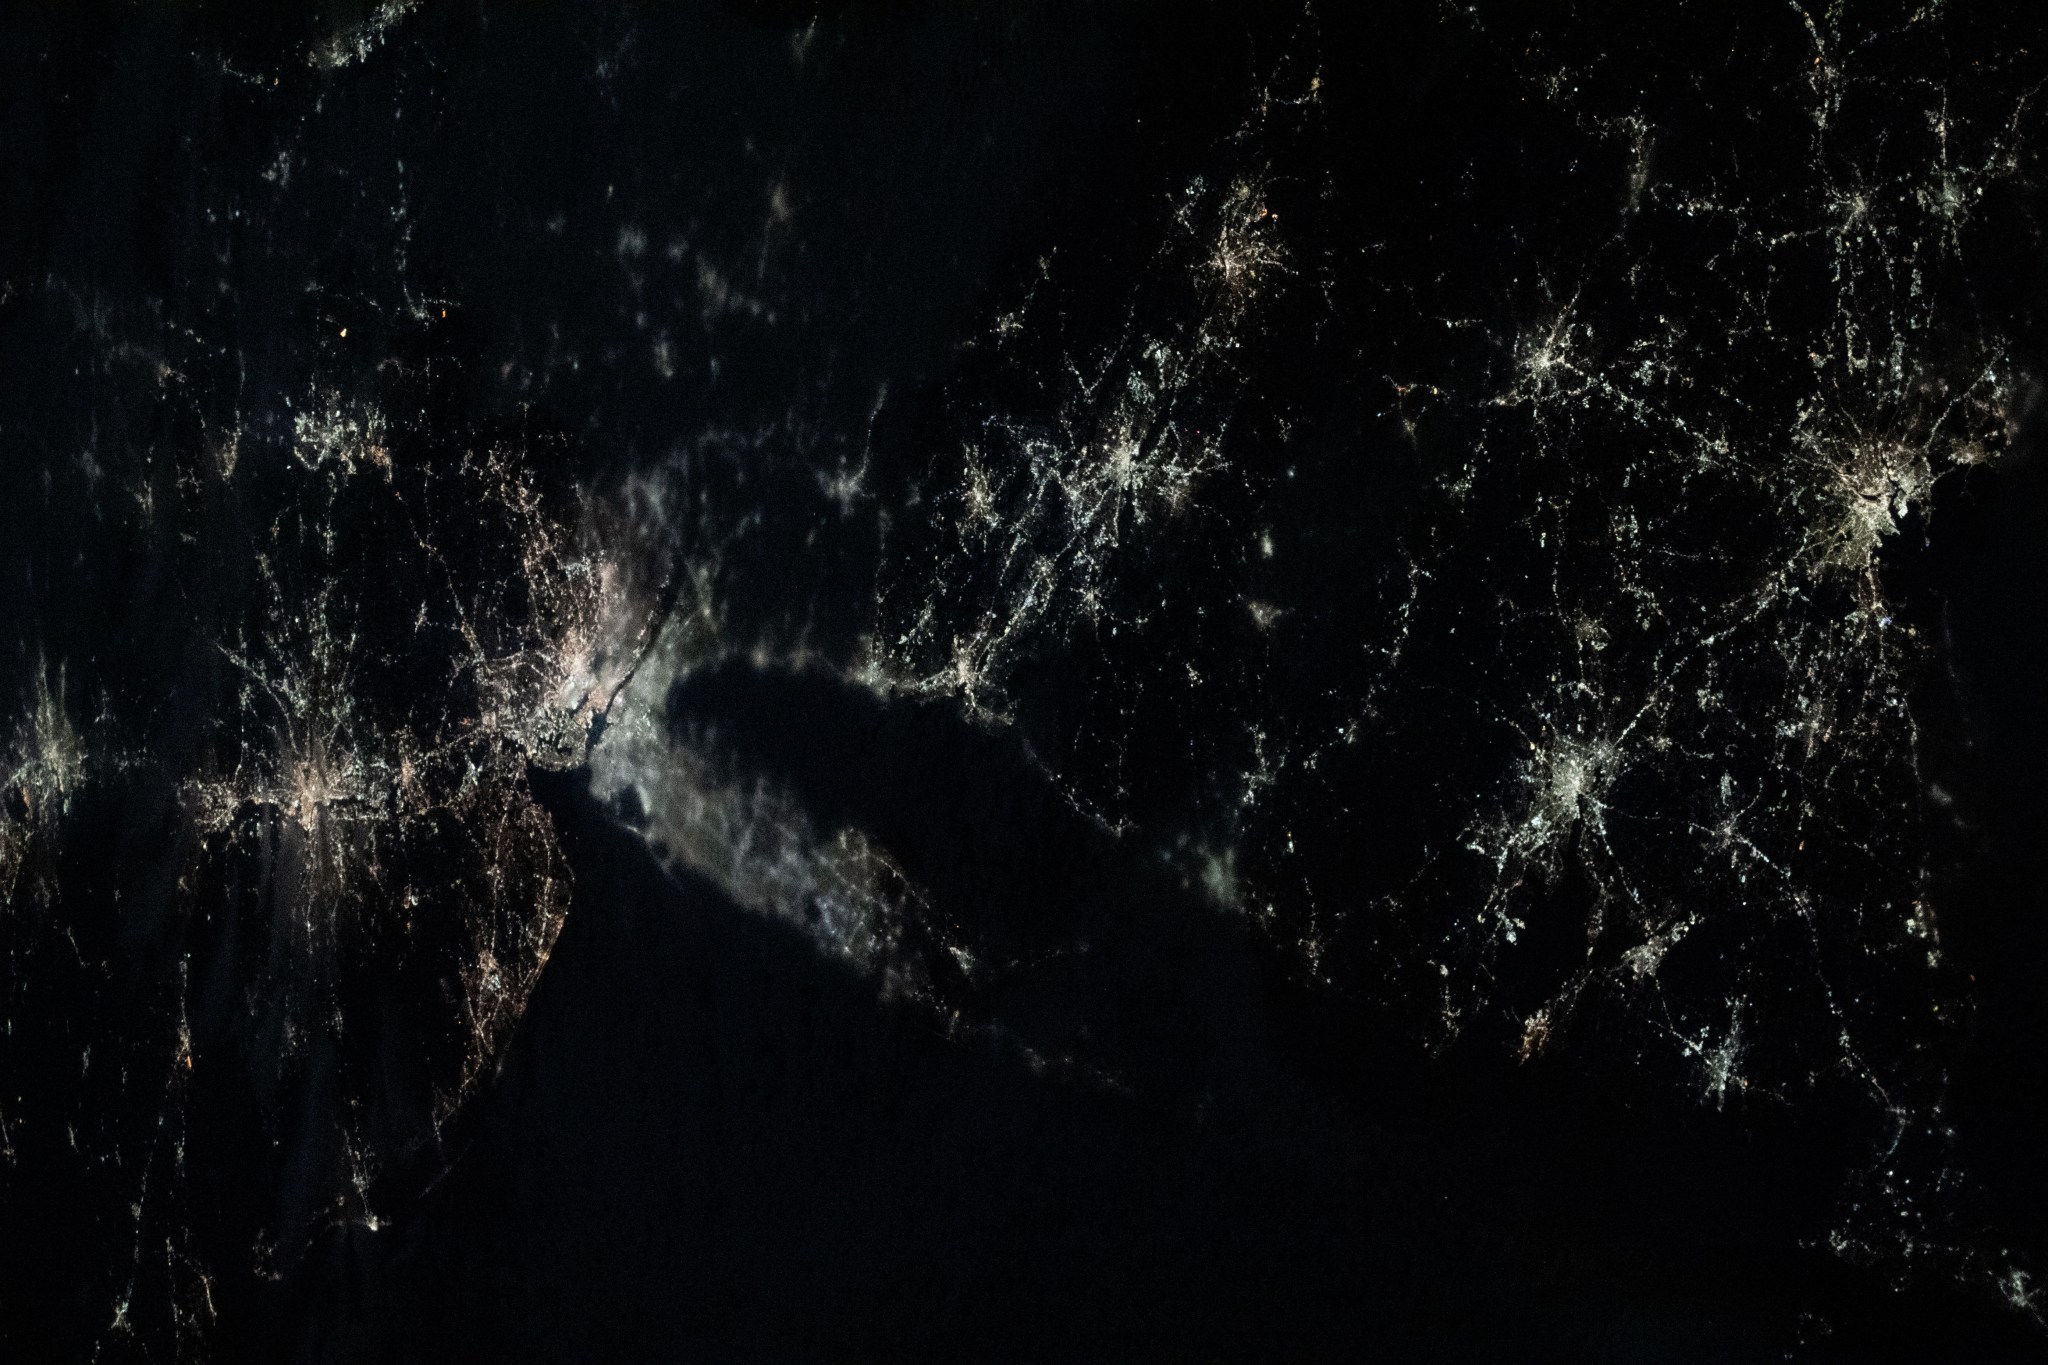 This nightime view shows major northeastern U.S. urban centers including a cloudy New York City; Philadelphia, Pennsylvania; Providence, Rhode Island; Boston Massachussetts; and more. Expedition 70 Flight Engineer Loral O'Hara of NASA photographed the area as the International Space Station orbited 262 miles above the Gulf of Maine.